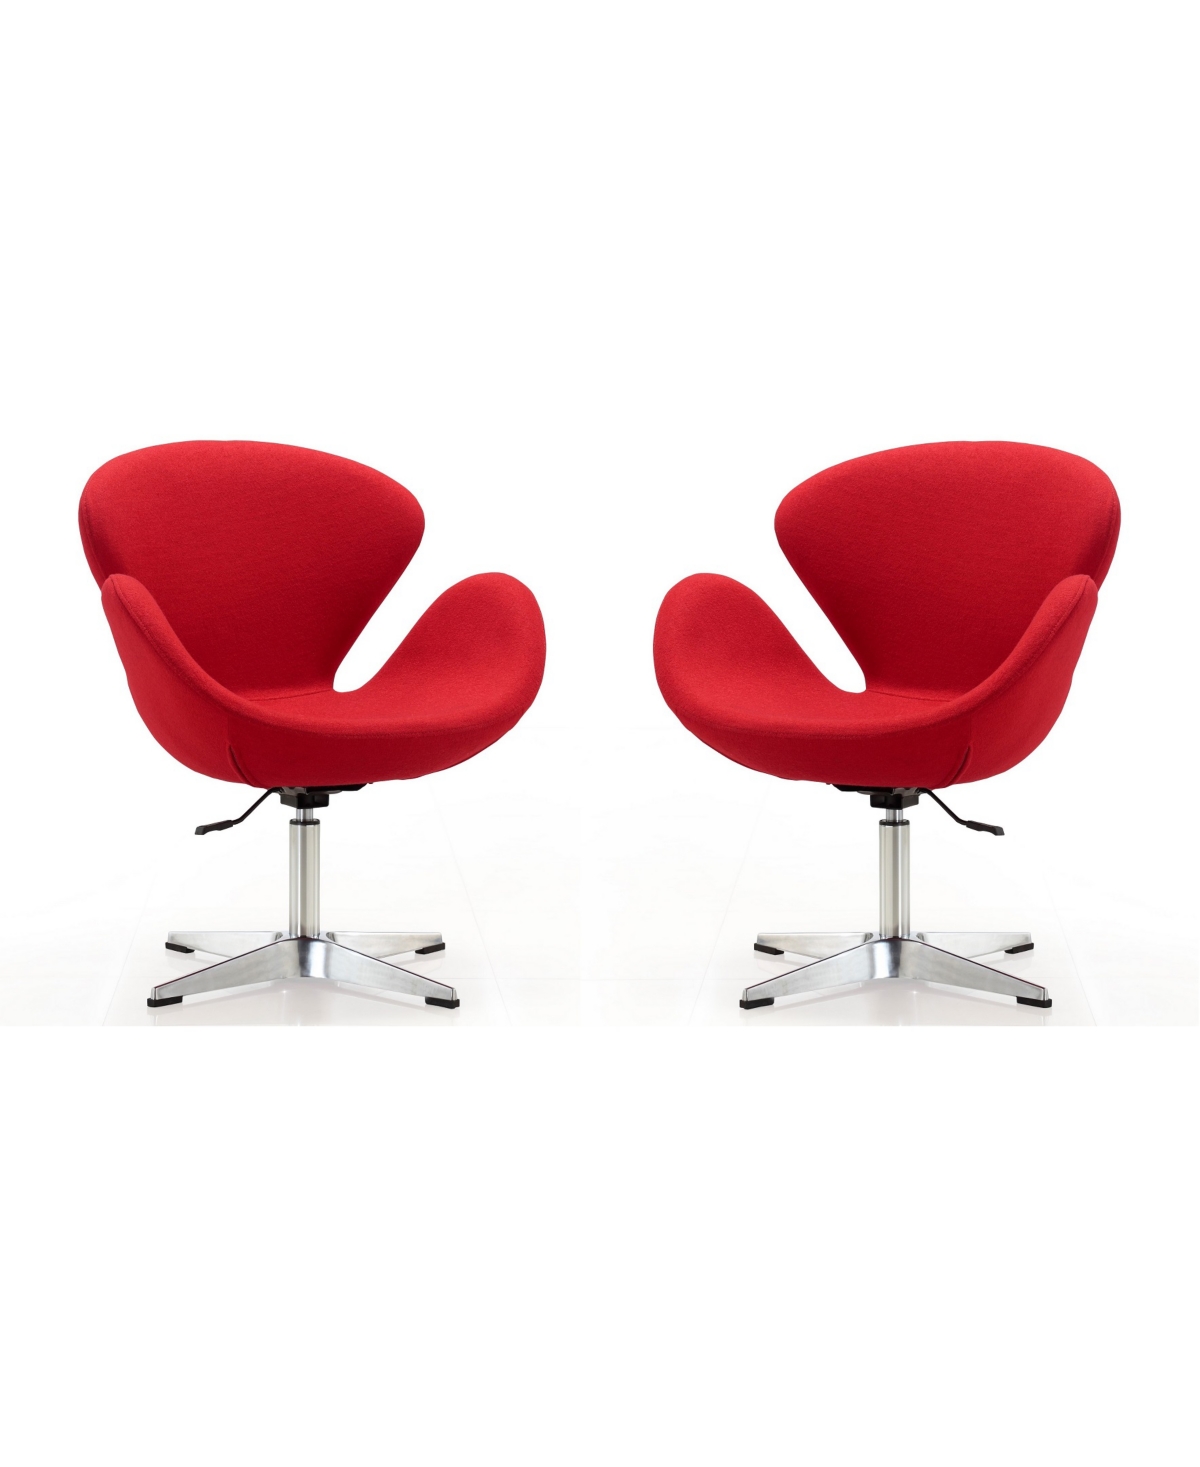 Manhattan Comfort Raspberry Adjustable Swivel Chair, Set Of 2 In Red,polished Chrome